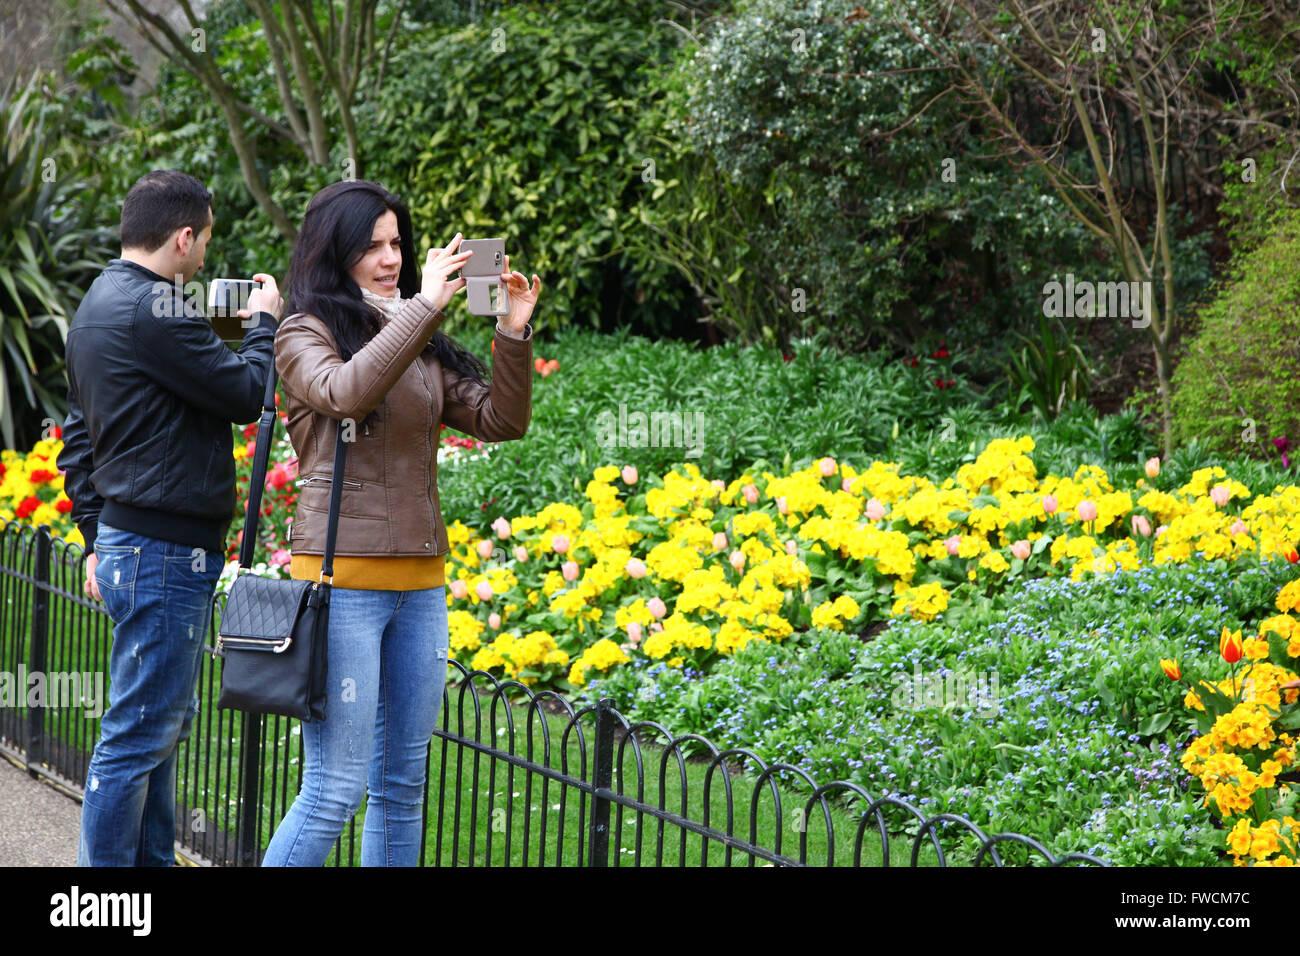 St James Park, London 3 April 2016 Couple tourists takes a photograph of the flowers on a warm afternoon in St James Park, London. Credit:  Dinendra Haria/Alamy Live News Stock Photo